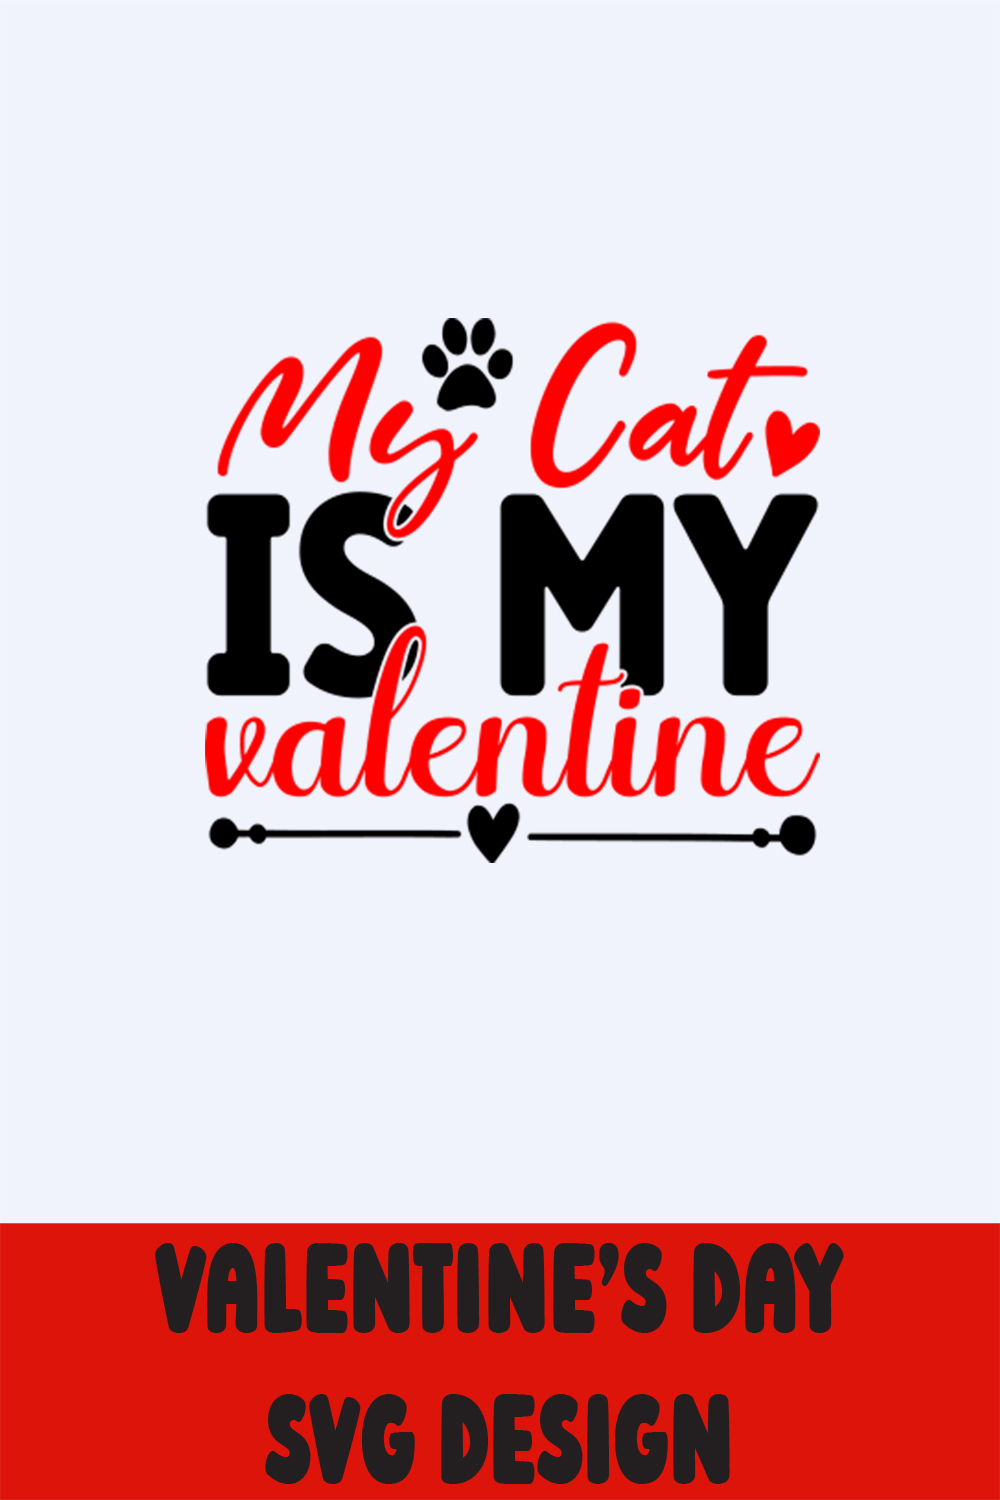 Image with irresistible caption My Cat Is My Valentine